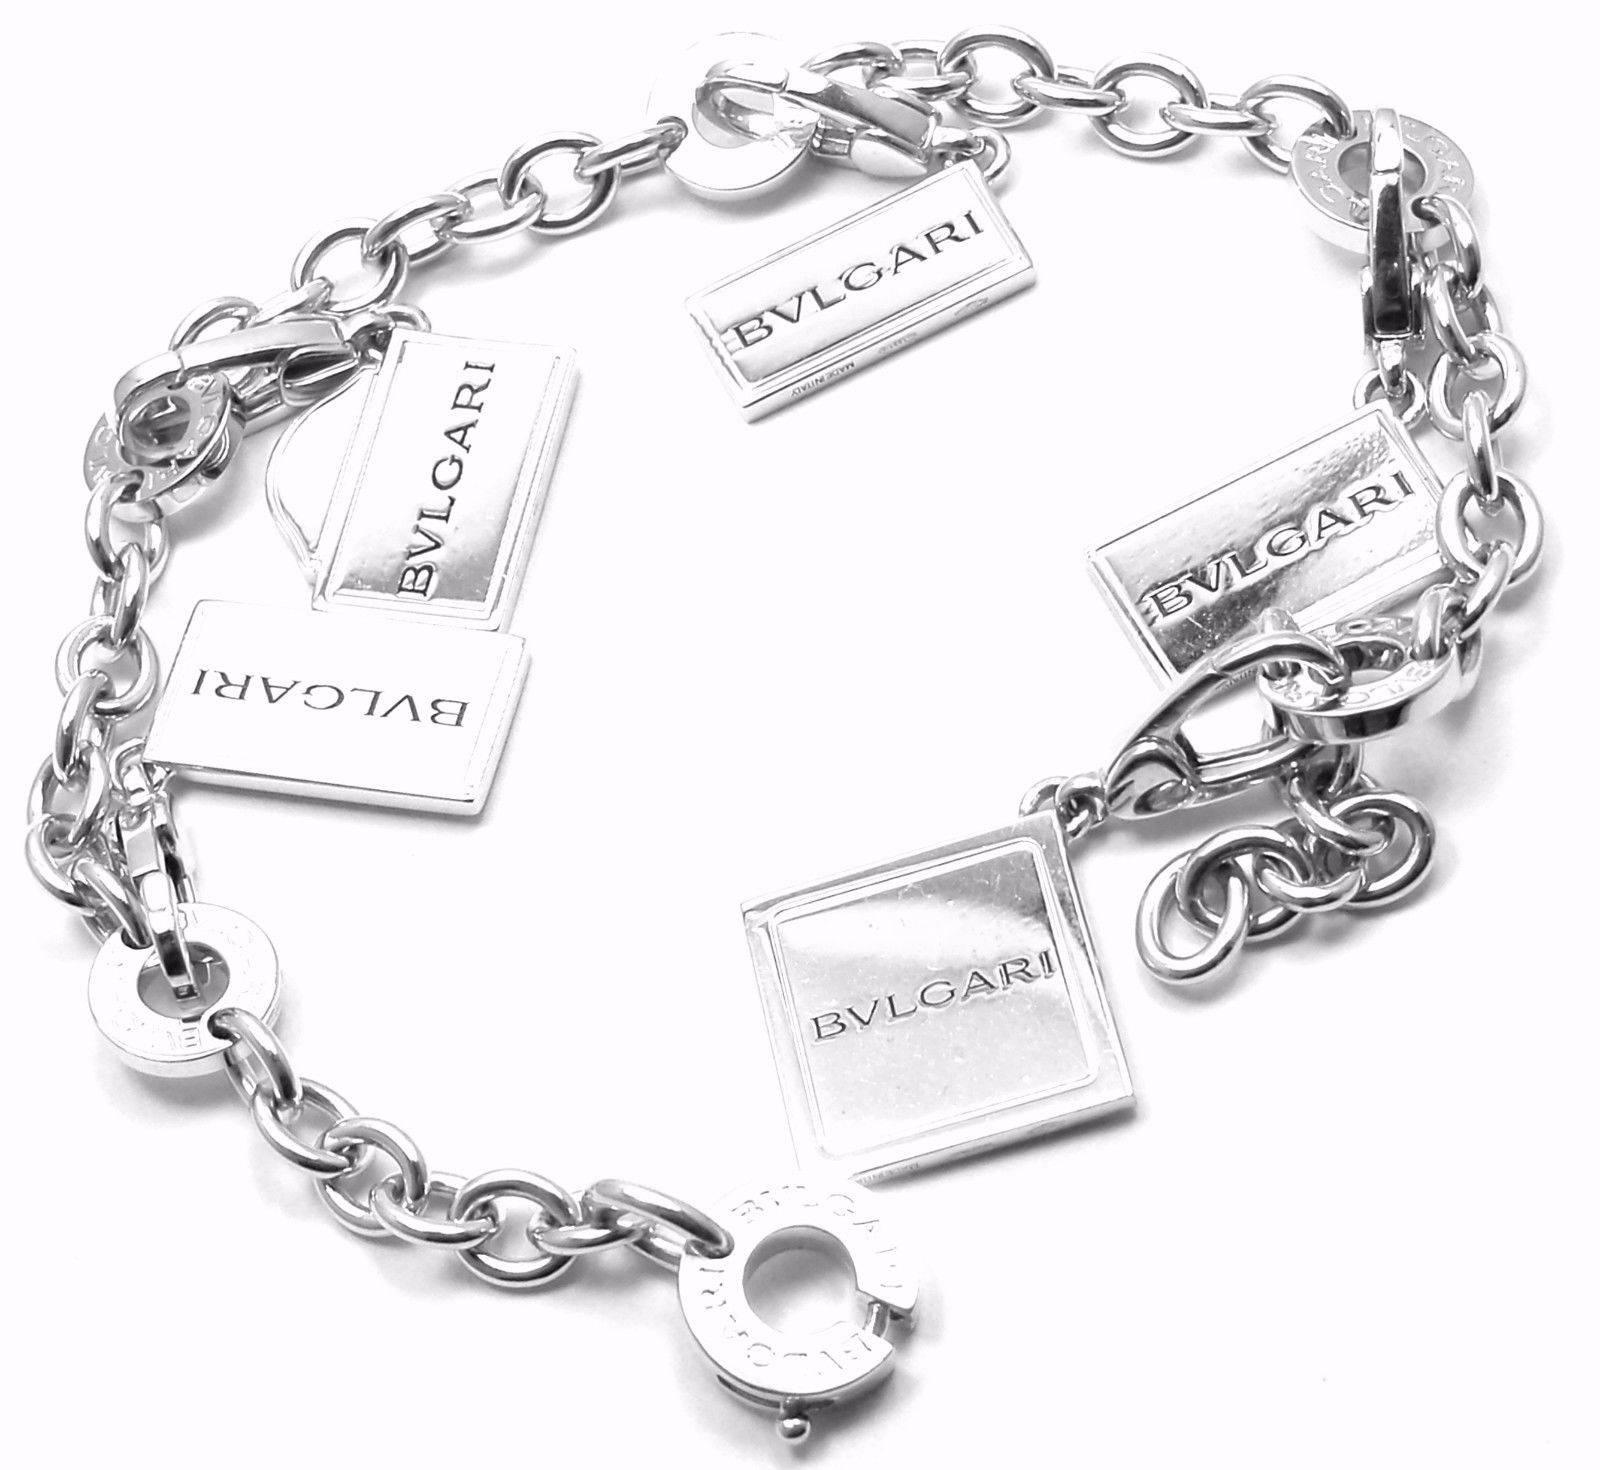 18k White Gold Charm Bracelet with 5 Charms of Major Bulgari Outlets by Bulgari. 
With 5 charms of major Bulgari outlets Via Dei Condotti, 1er Arr. Place Vendome, Ginza St, New Bond Street w1 City of Westminister, Fifth Ave.
This bracelet comes